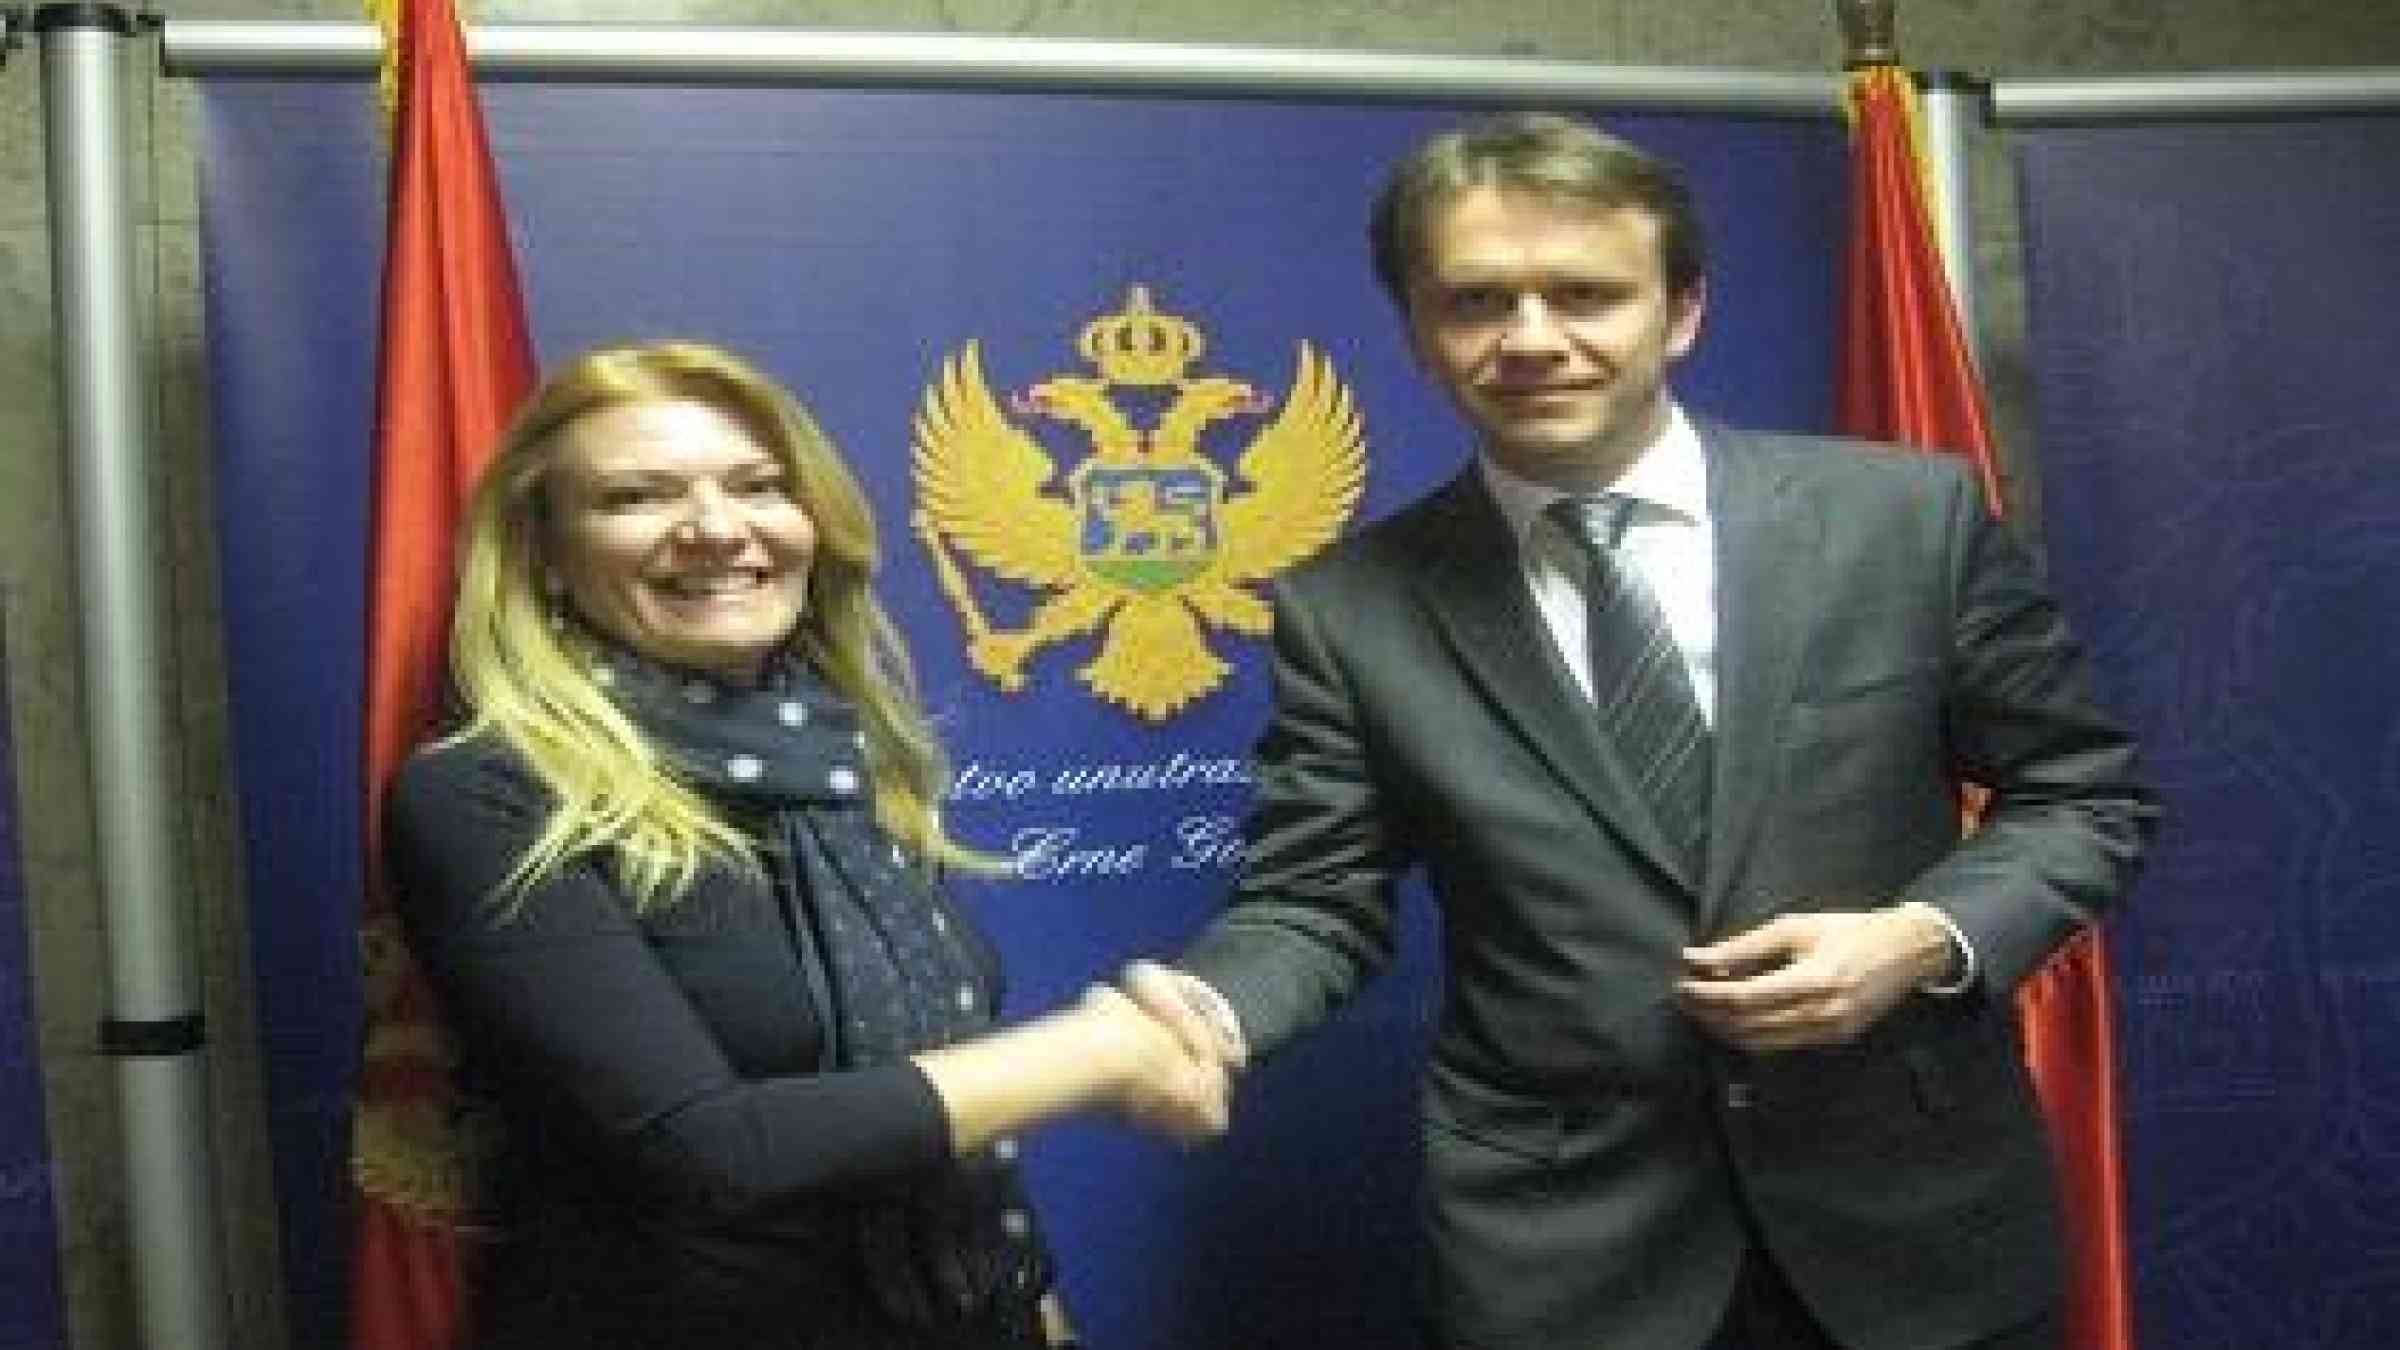 Montenegro’s Minister of Interior Mr. Raško Konjević with UNISDR Head of the Regional Office for Europe, Paola Albrito at the launch of the National Platform for DRR, 16 December 2014. (Photo: UNISDR)